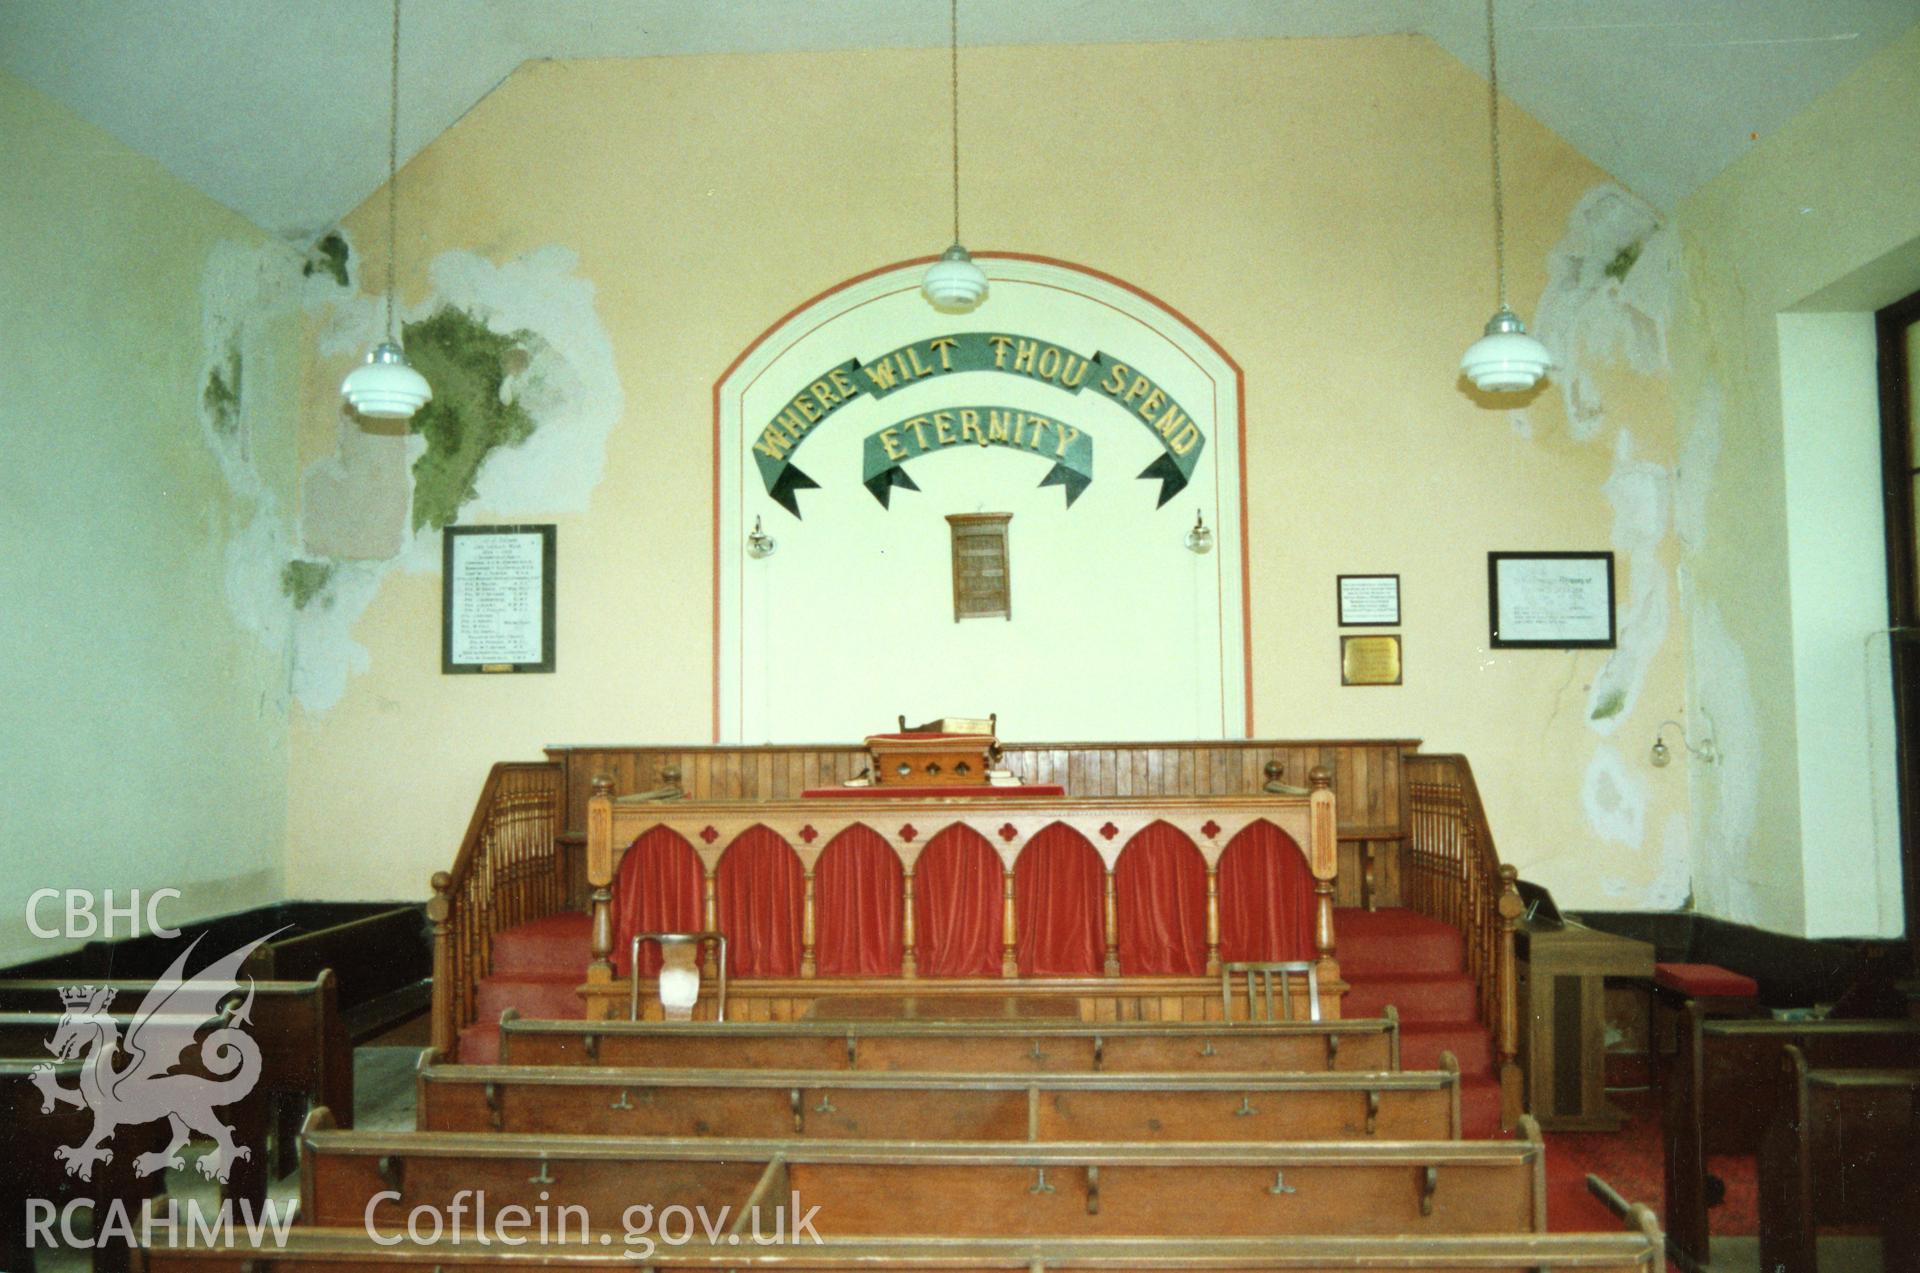 Digital copy of a colour photograph showing an interior view of Zoar Independent Chapel, Carew Newton, taken by Robert Scourfield, 1996.